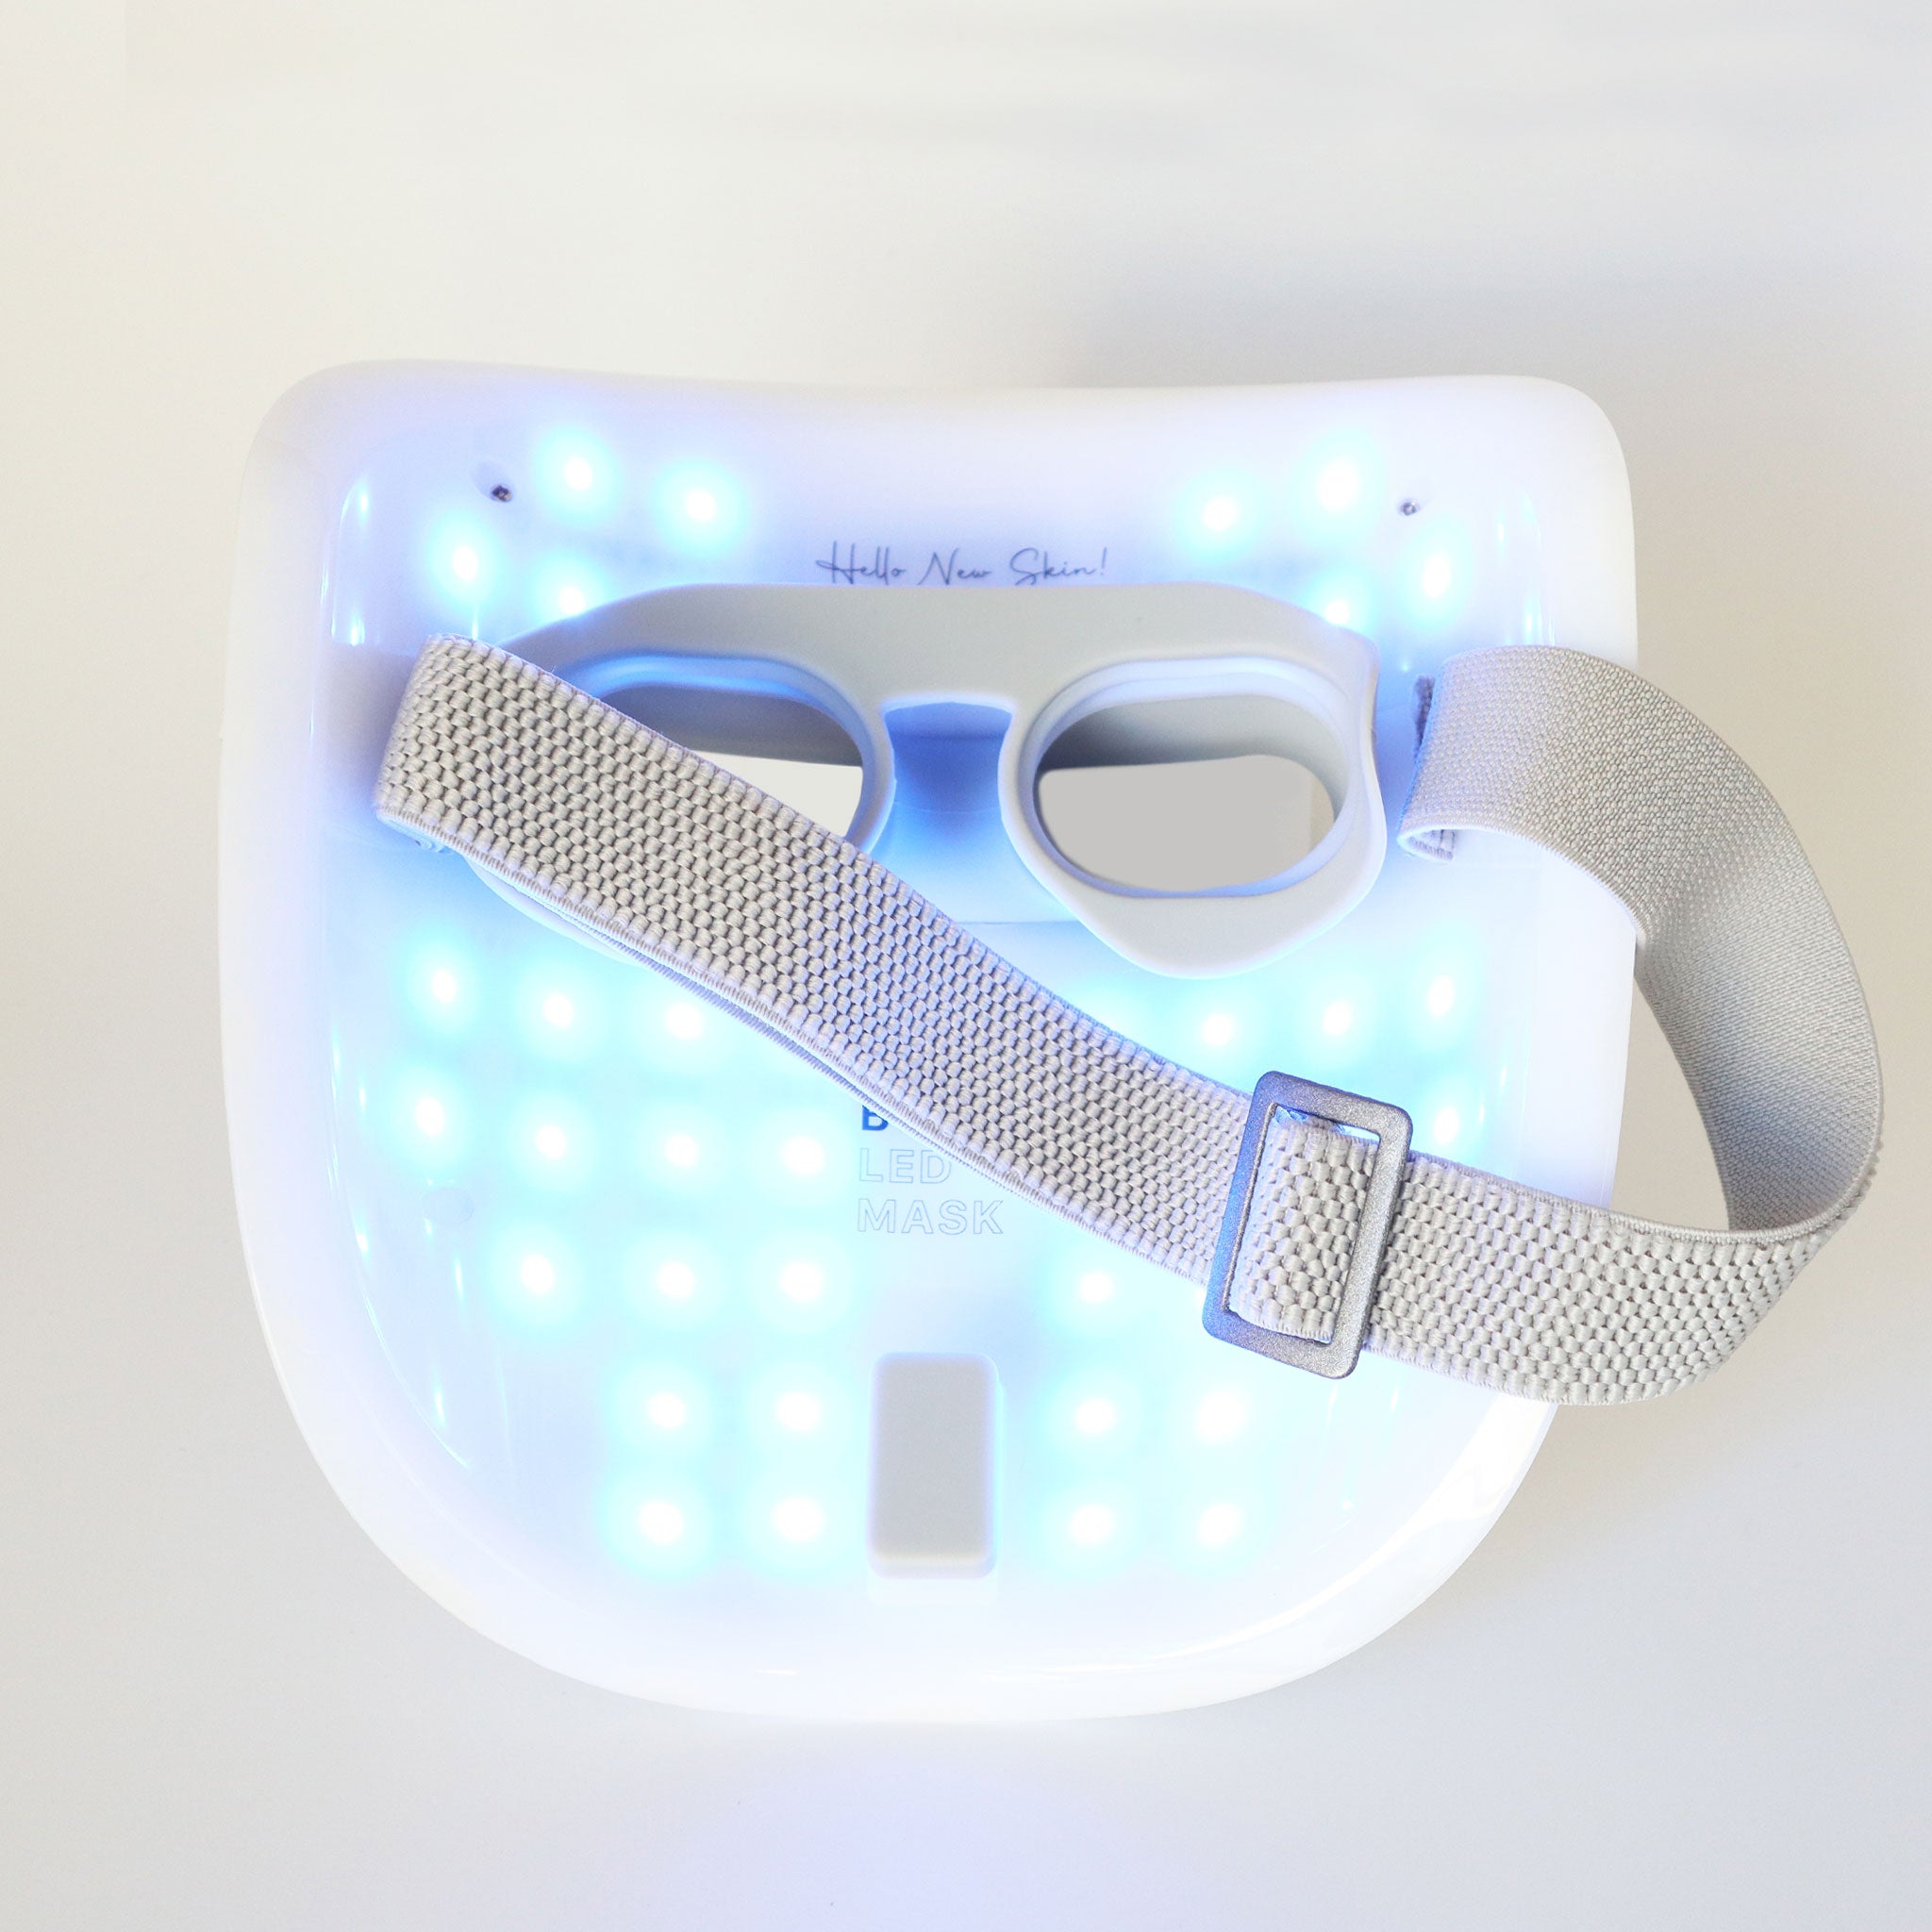 Permaderm Boost LED Mask - Wireless Face Mask for Anti-Ageing and Acne